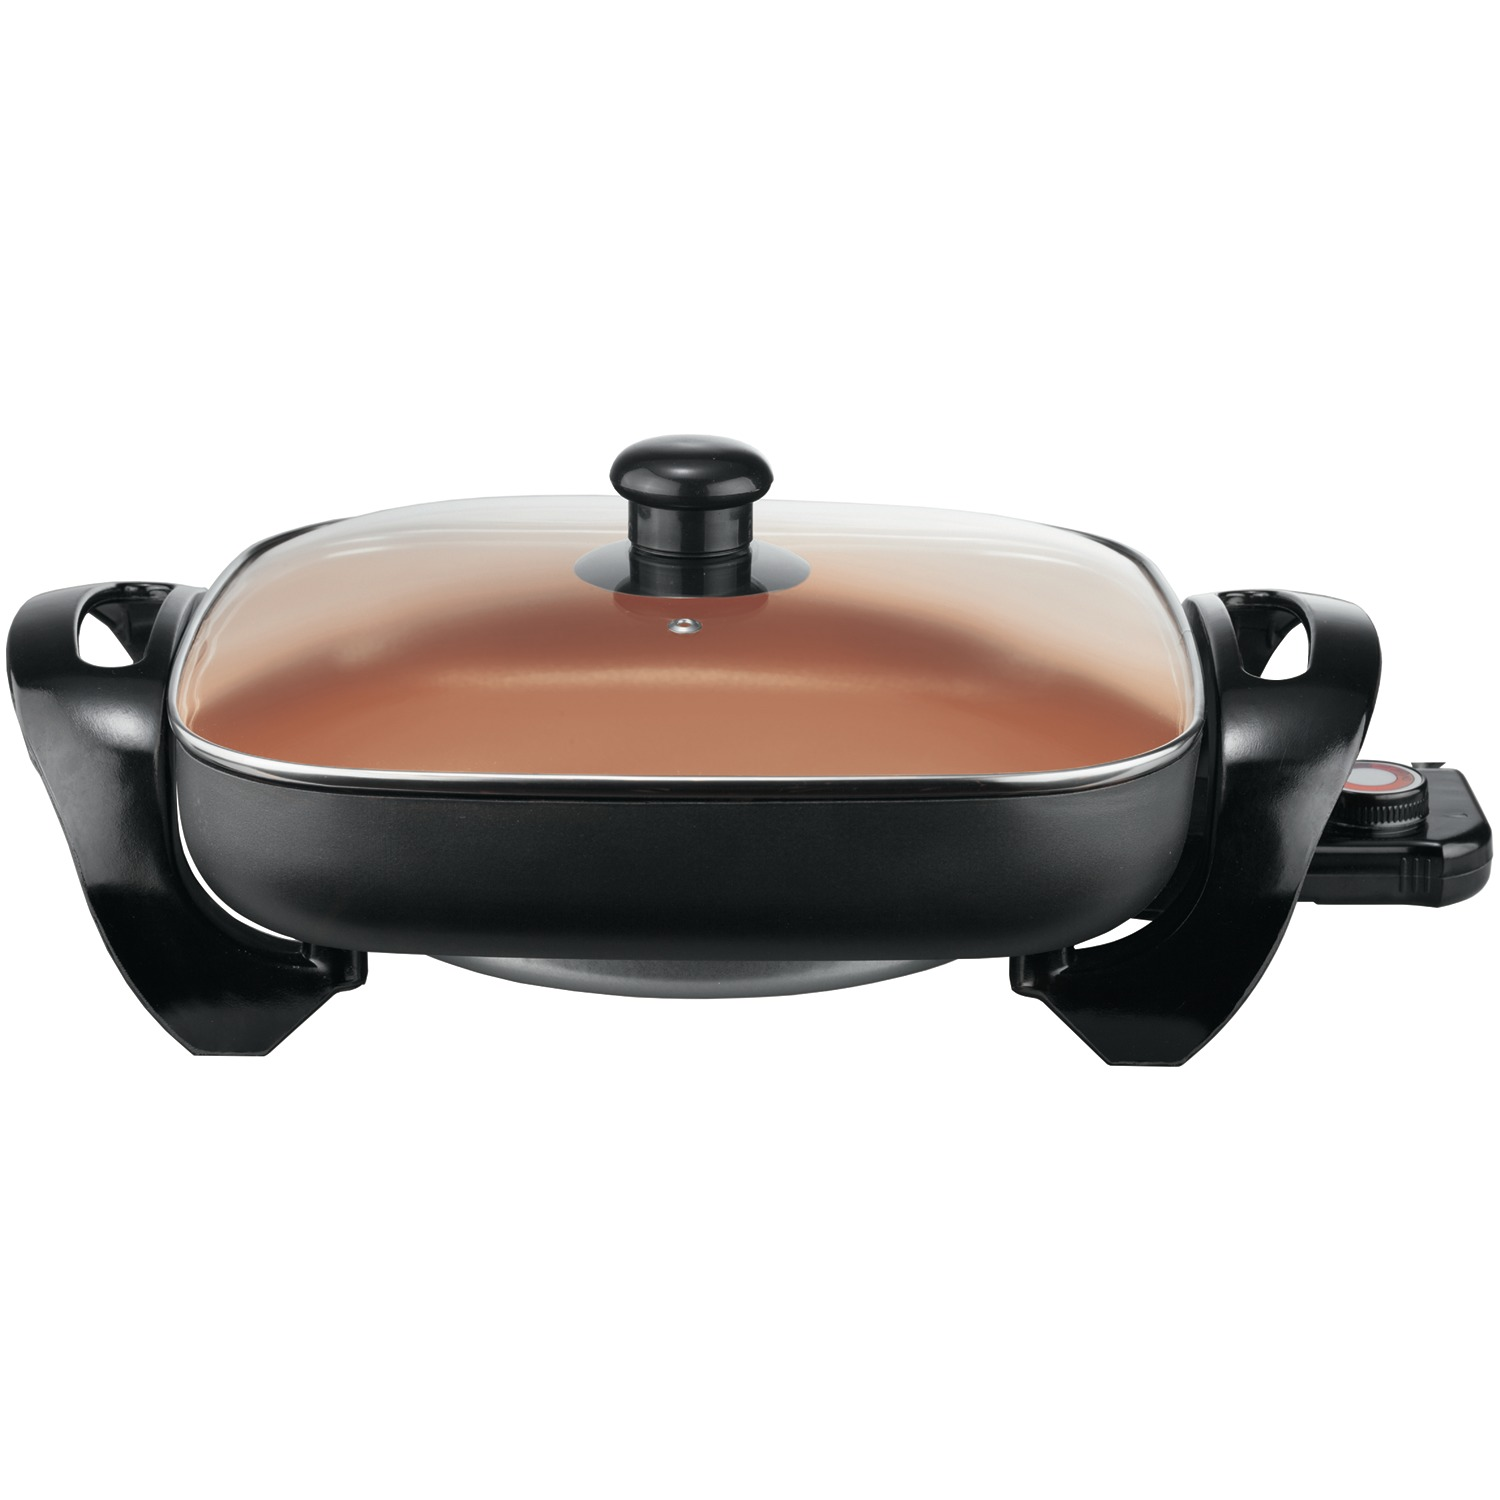 Brentwood 13-Inch Nonstick Copper Electric Skillet